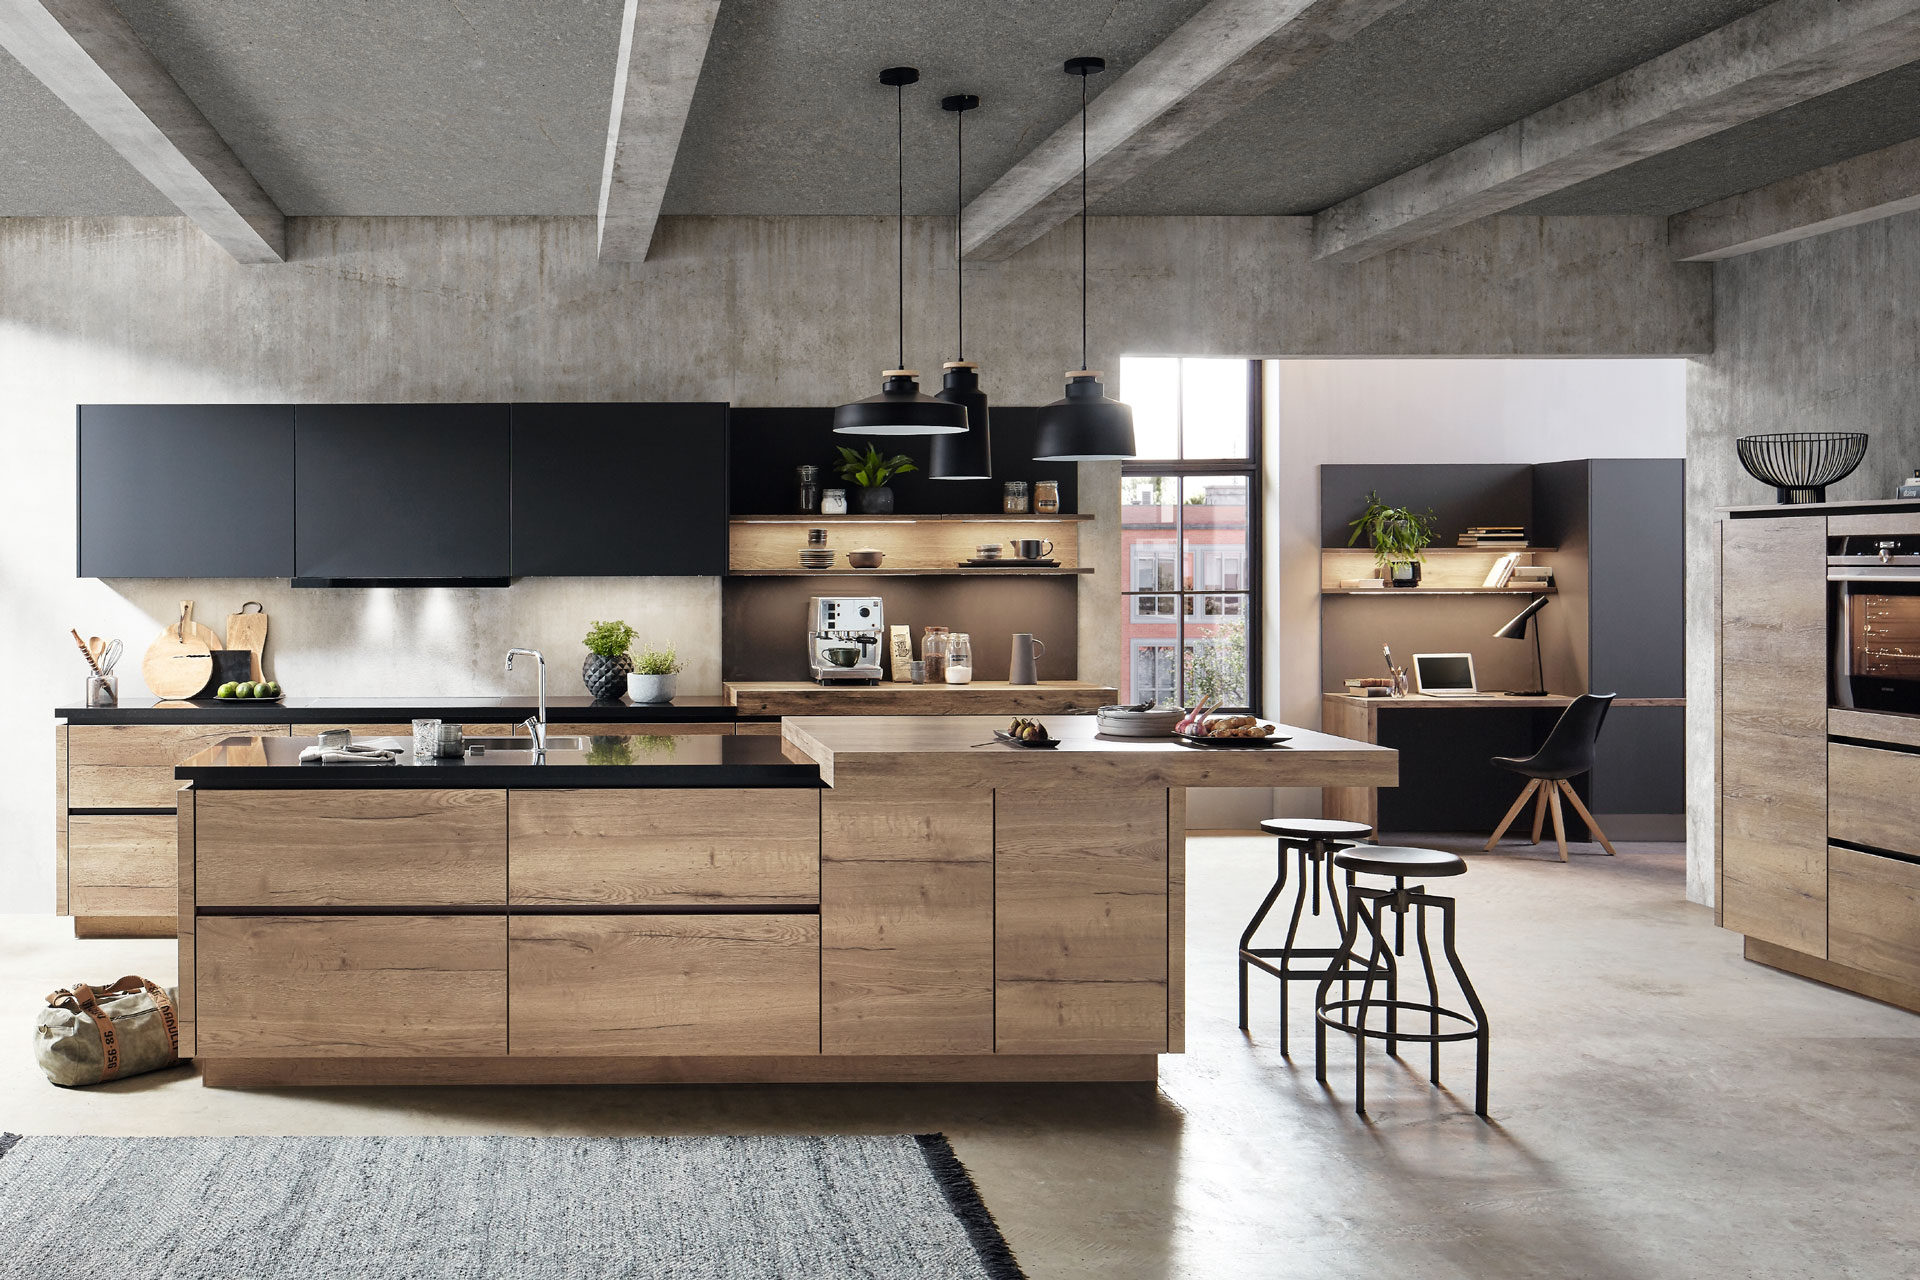 A consciously natural kitchen crafted in Berlin